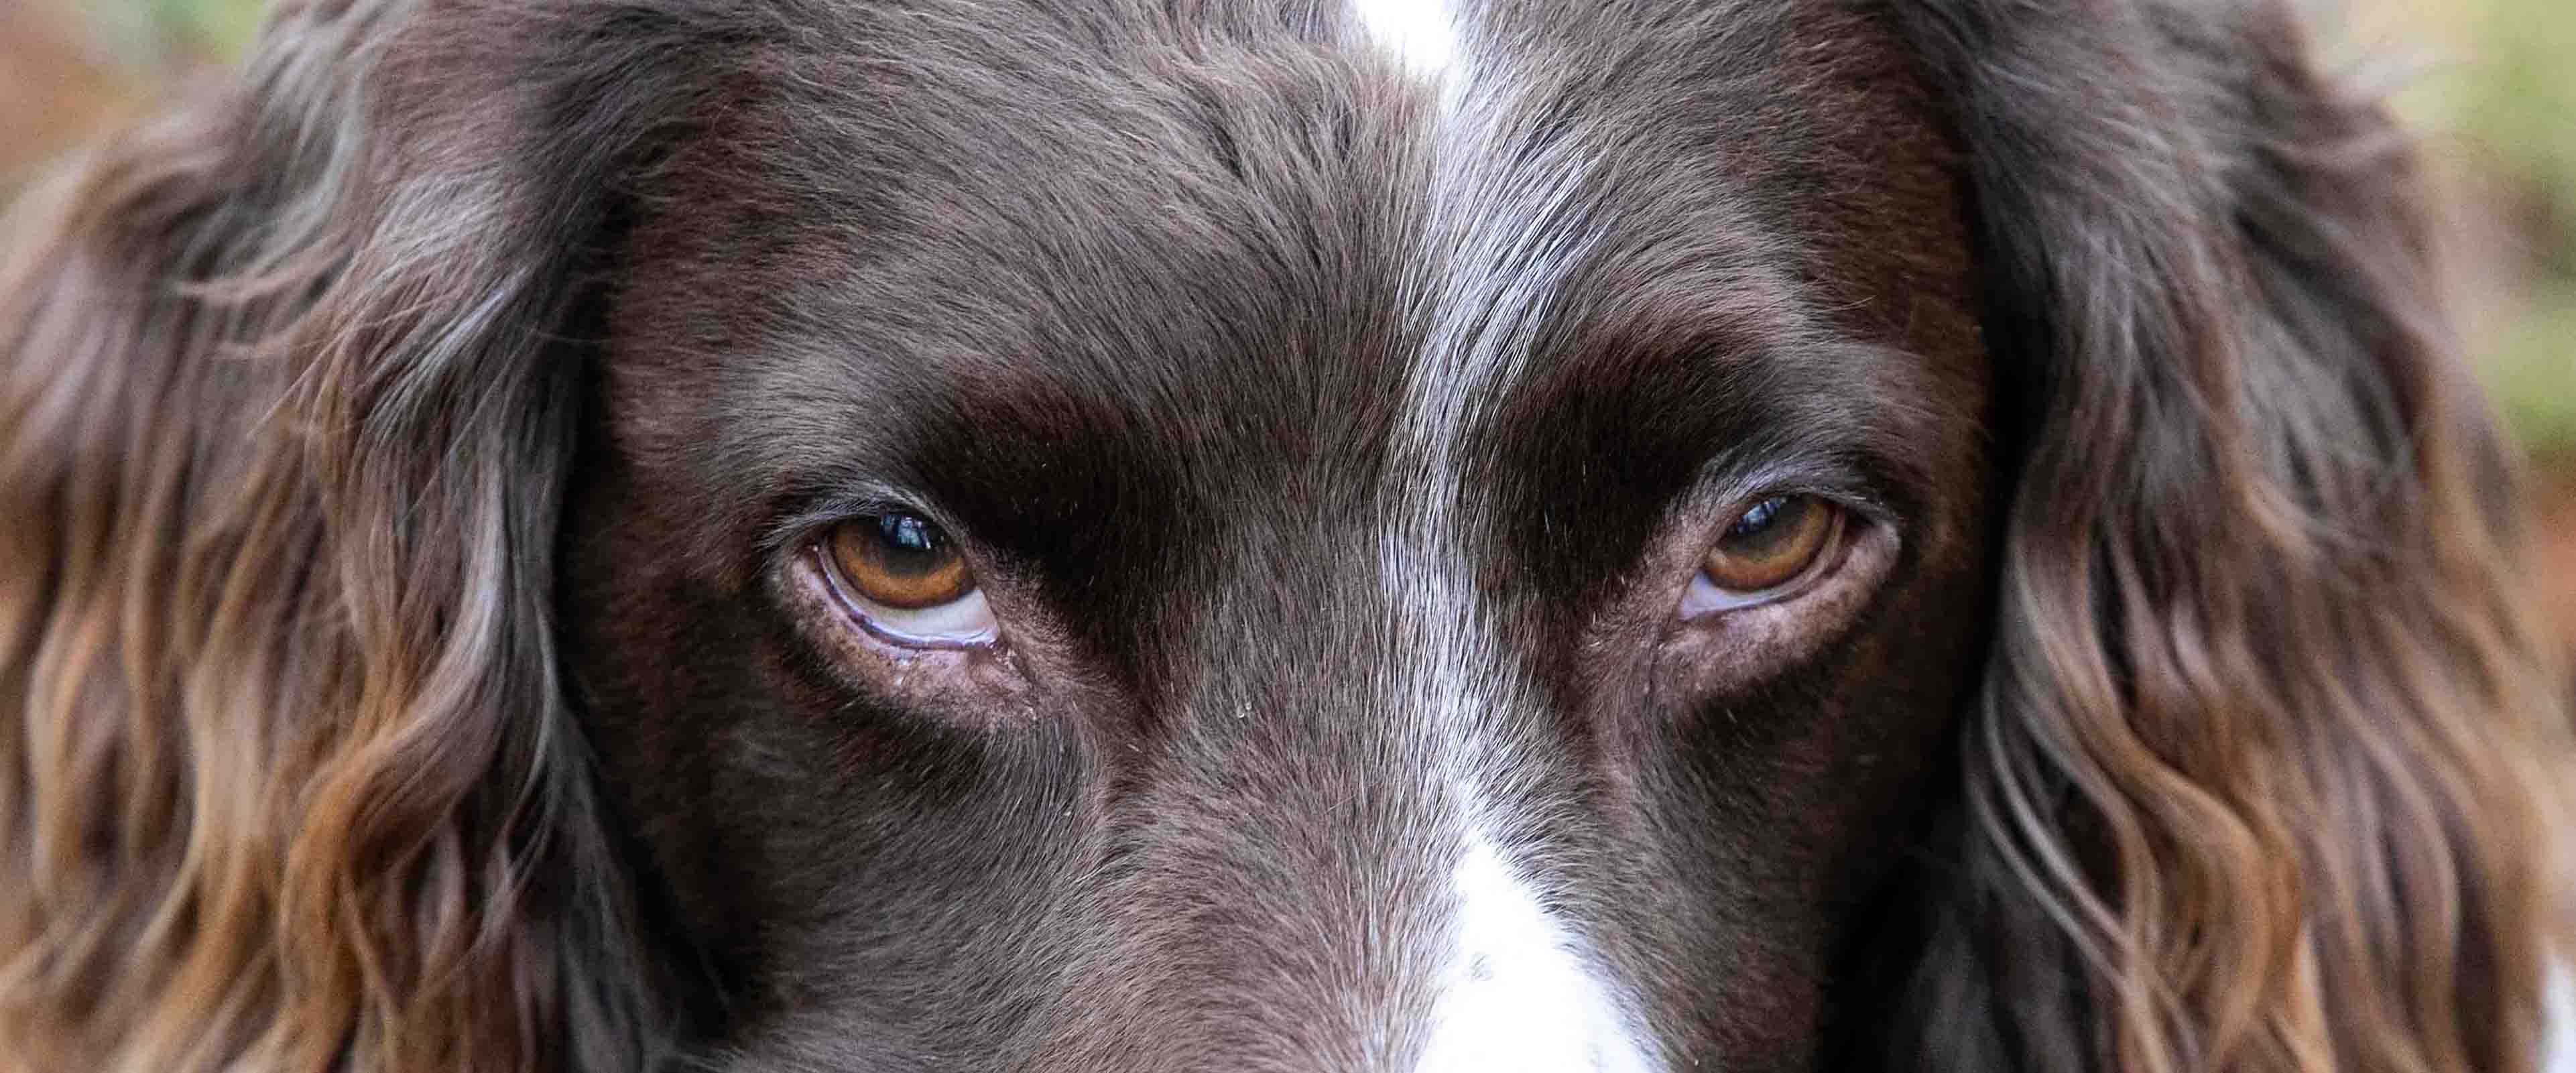 "Dogs look into your soul and help repair the damage"